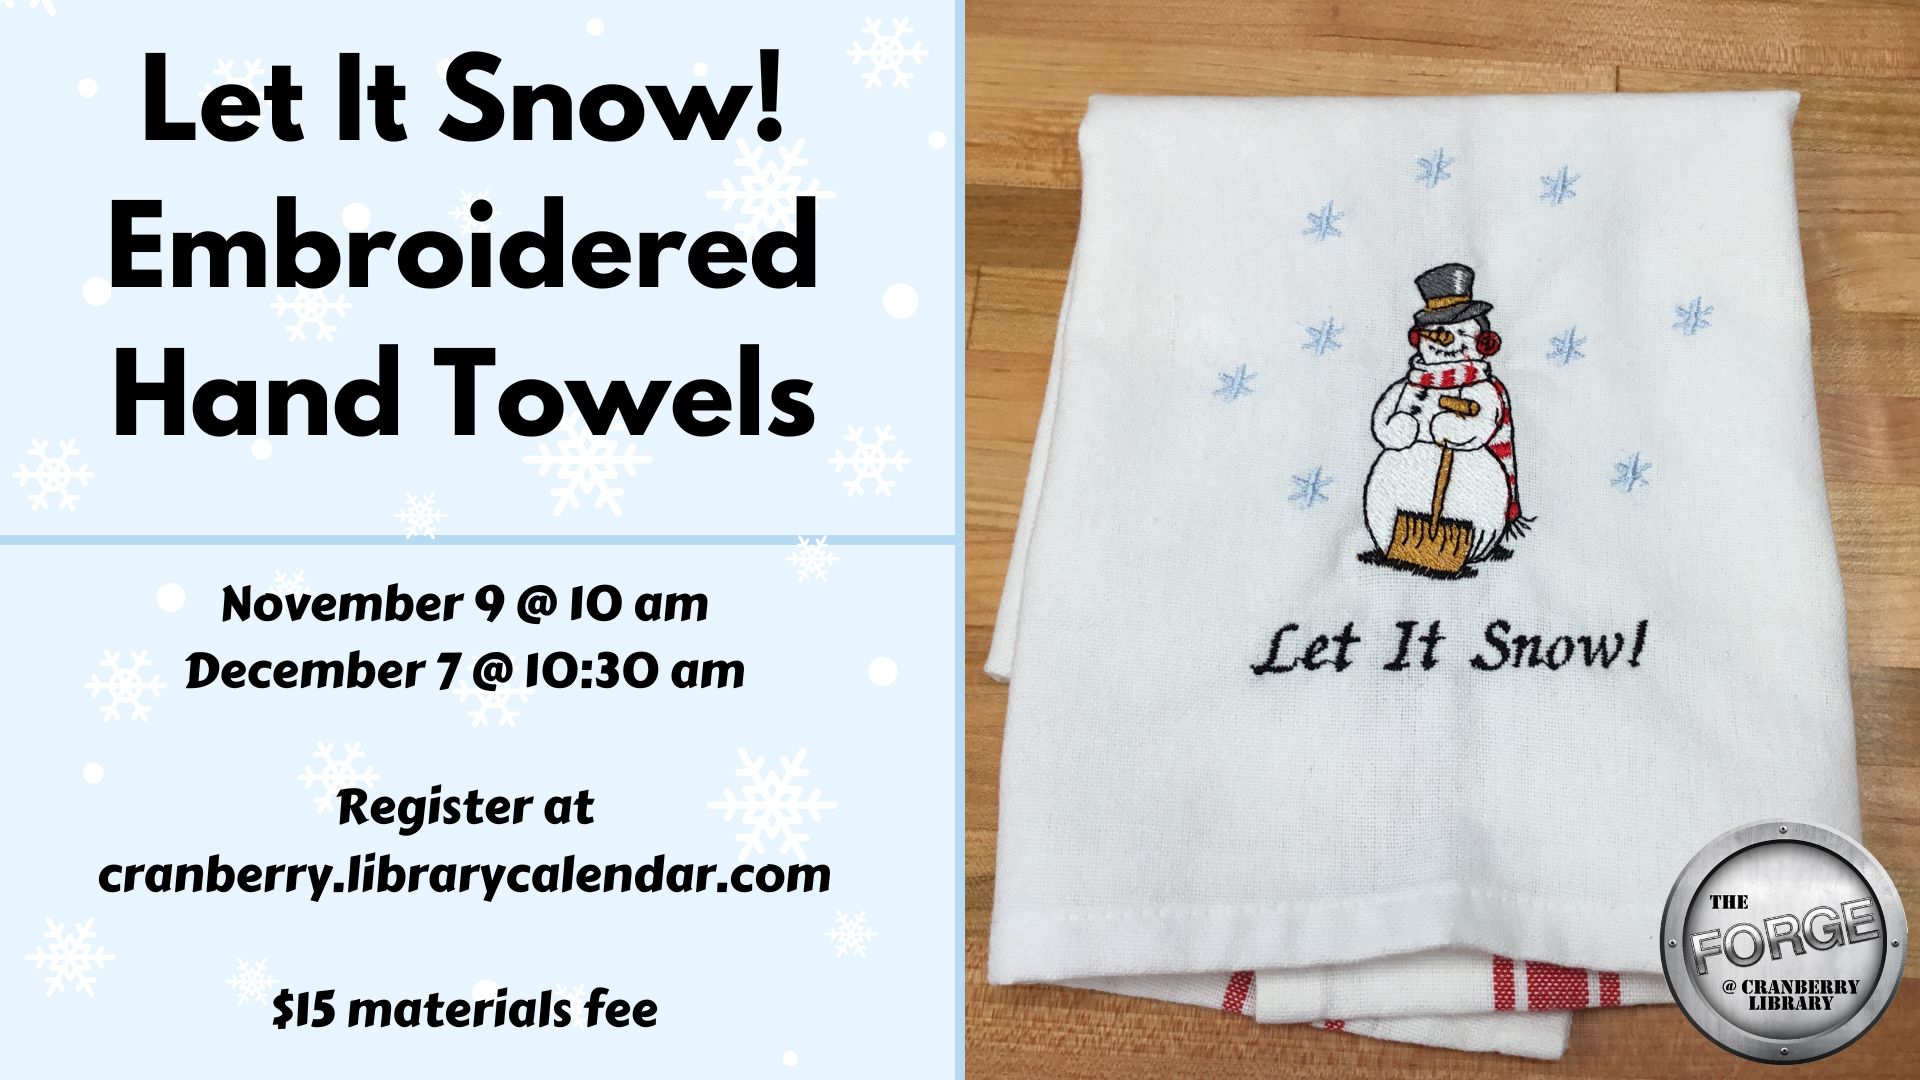 Flyer with a hand towel embroidered with a snowman